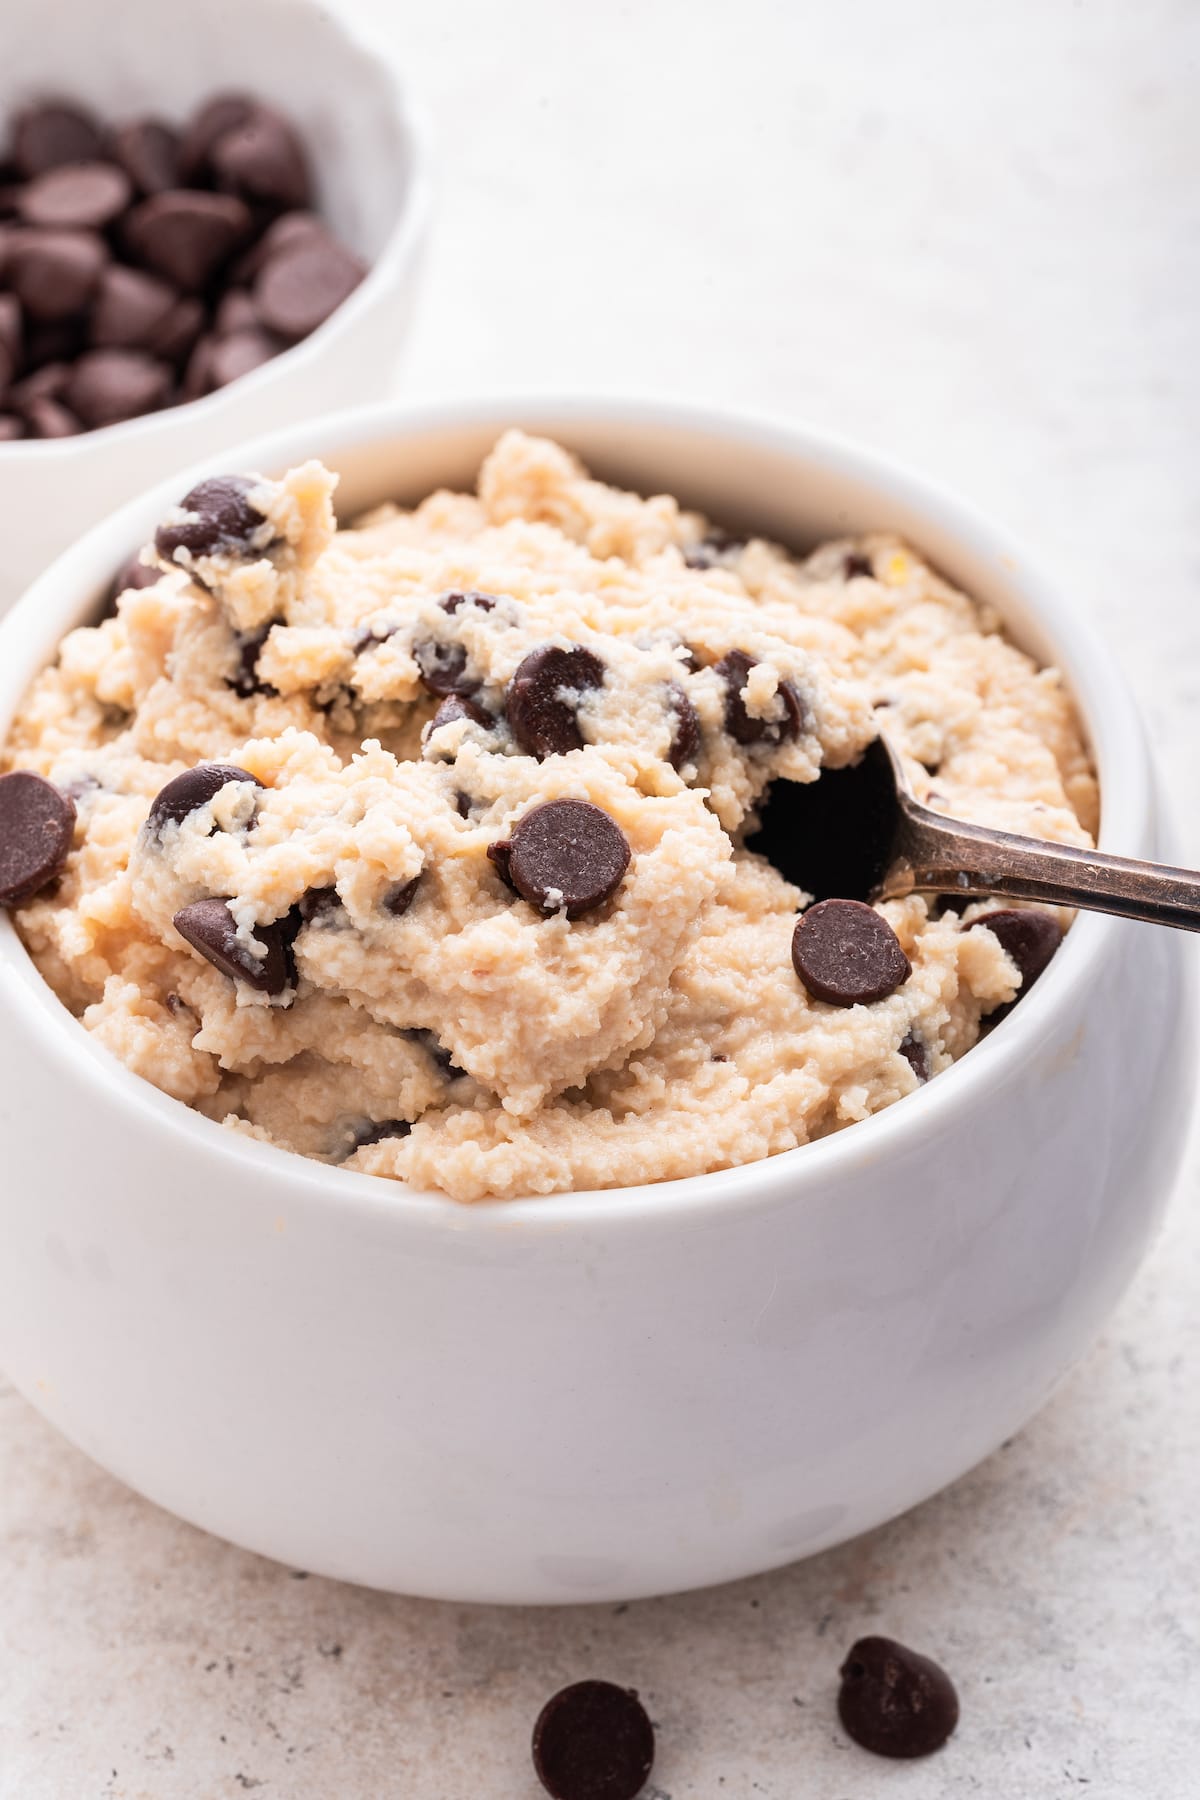 Spoon into a small bowl of cookie dough with cottage cheese.